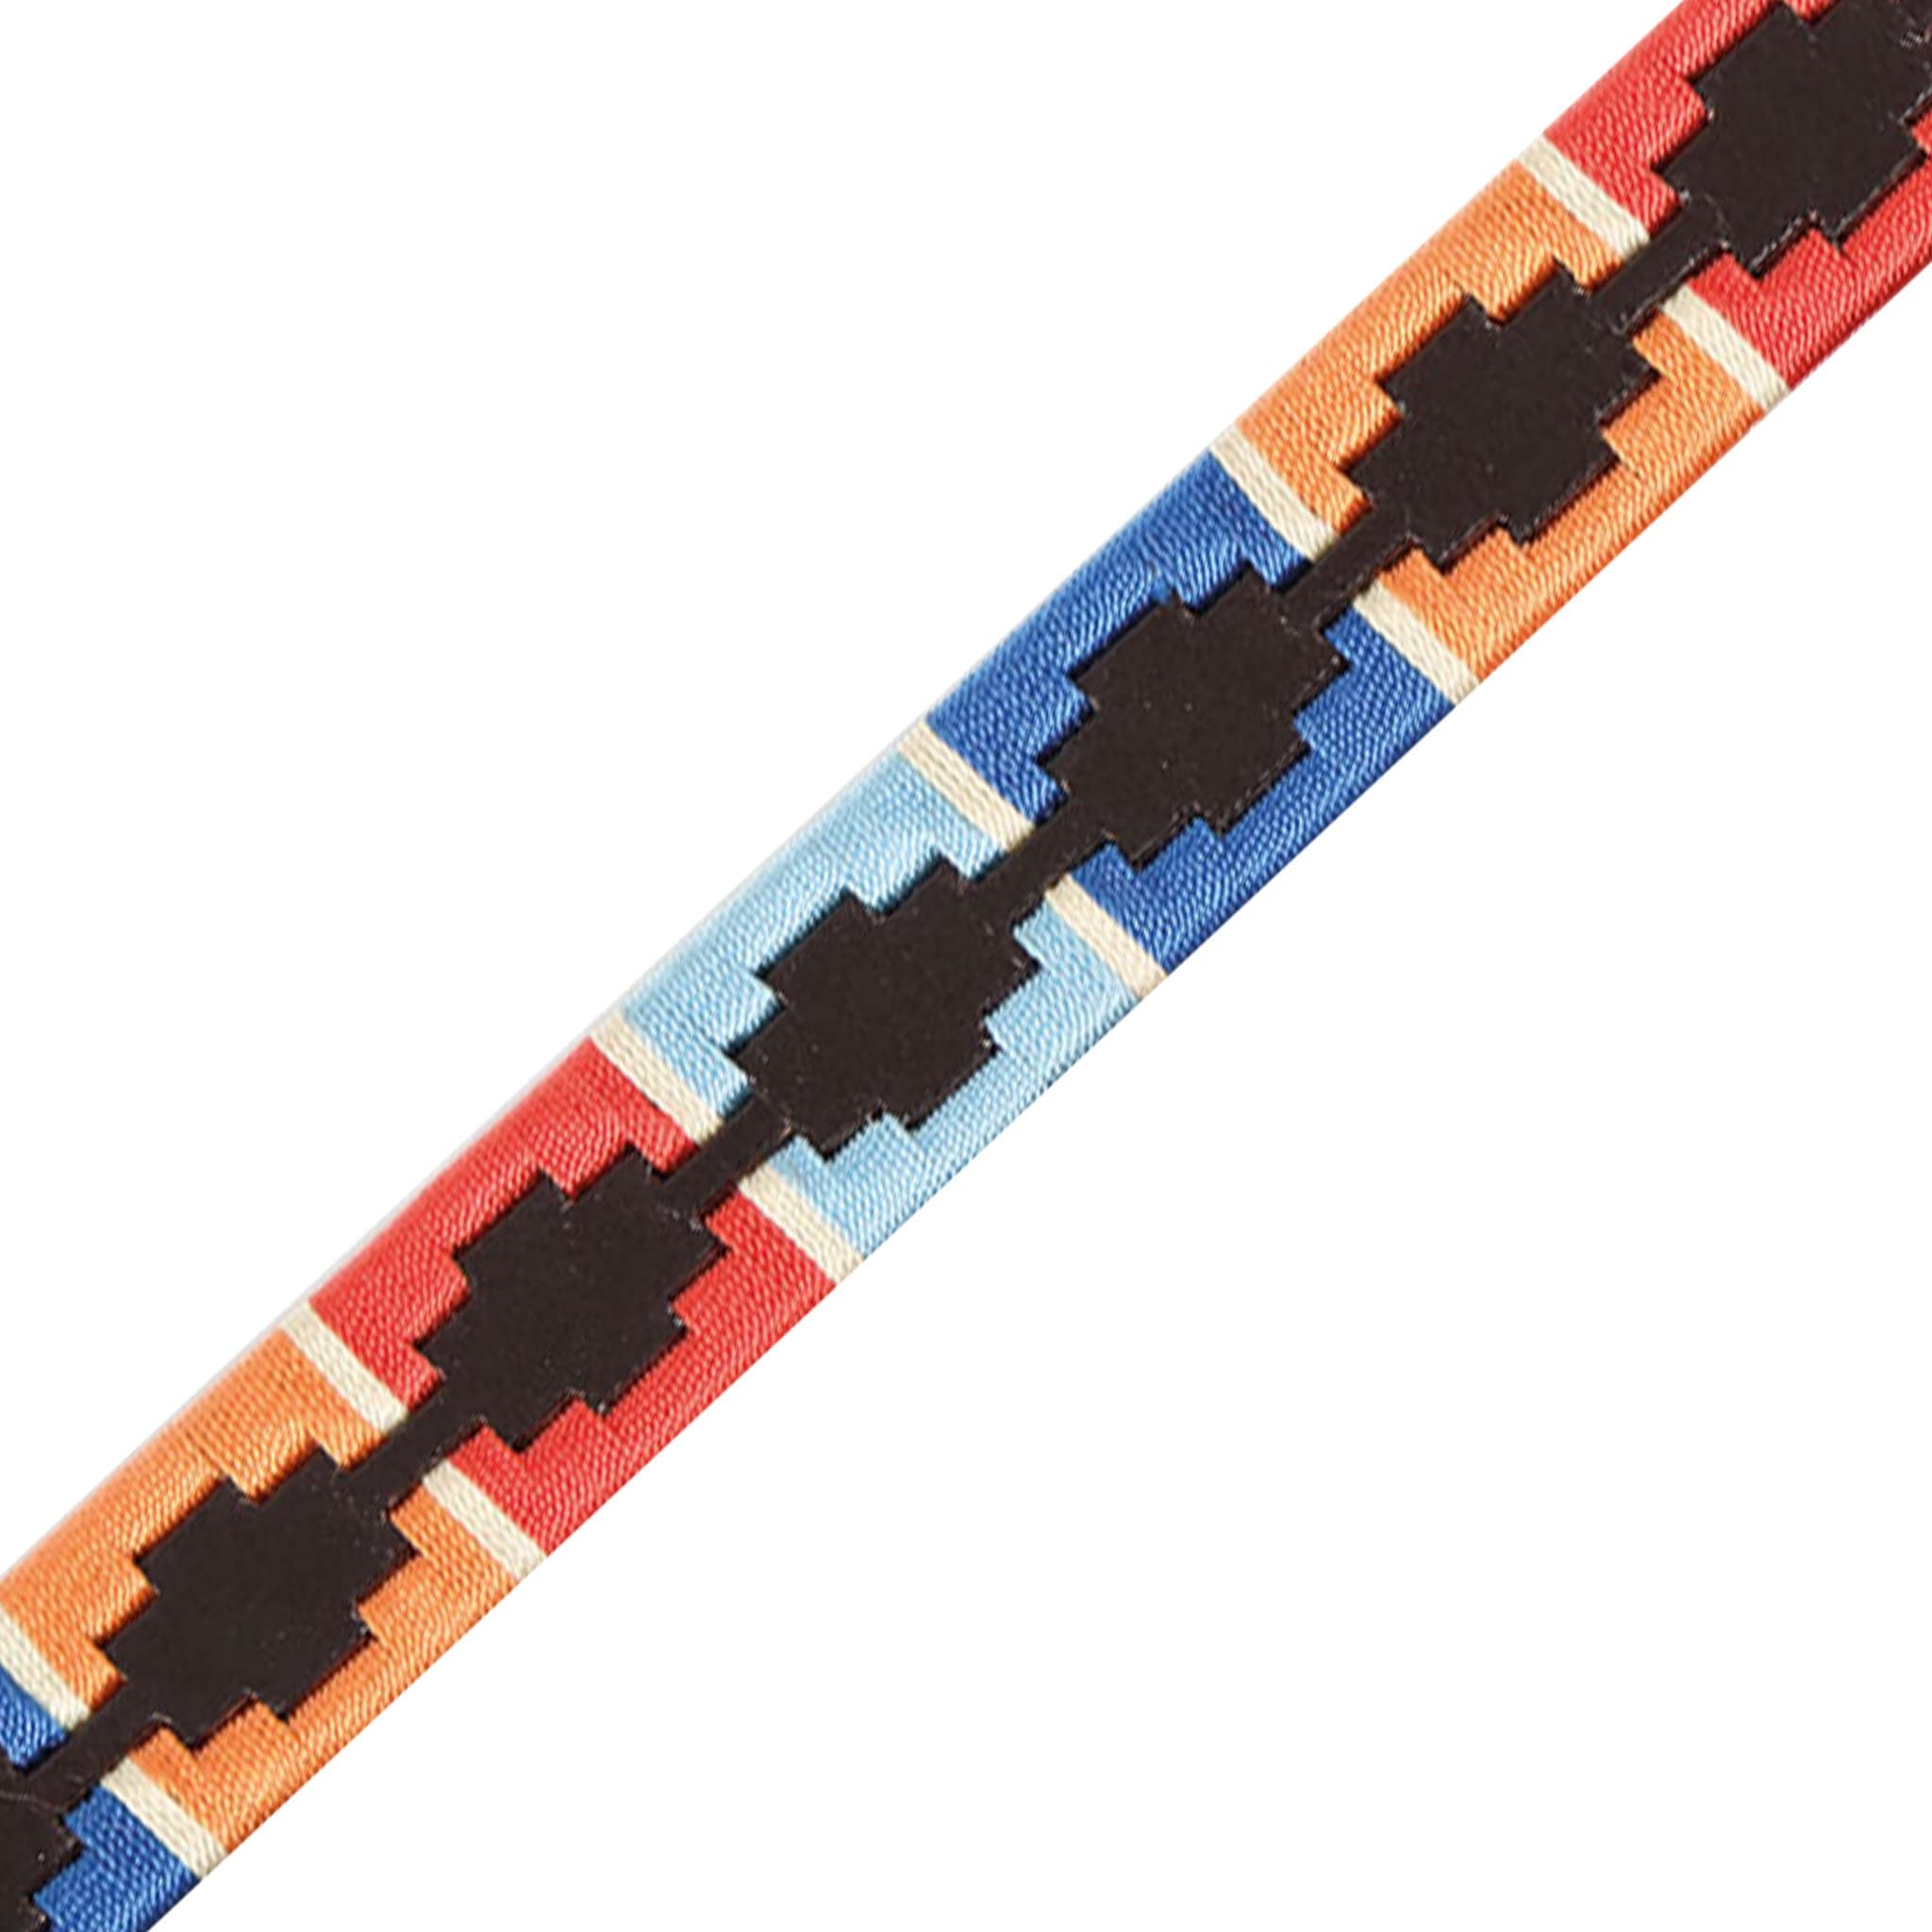 Shires Aubrion Drover Polo Belt Standard Turquoise/Red/Orange/Blue 9969.